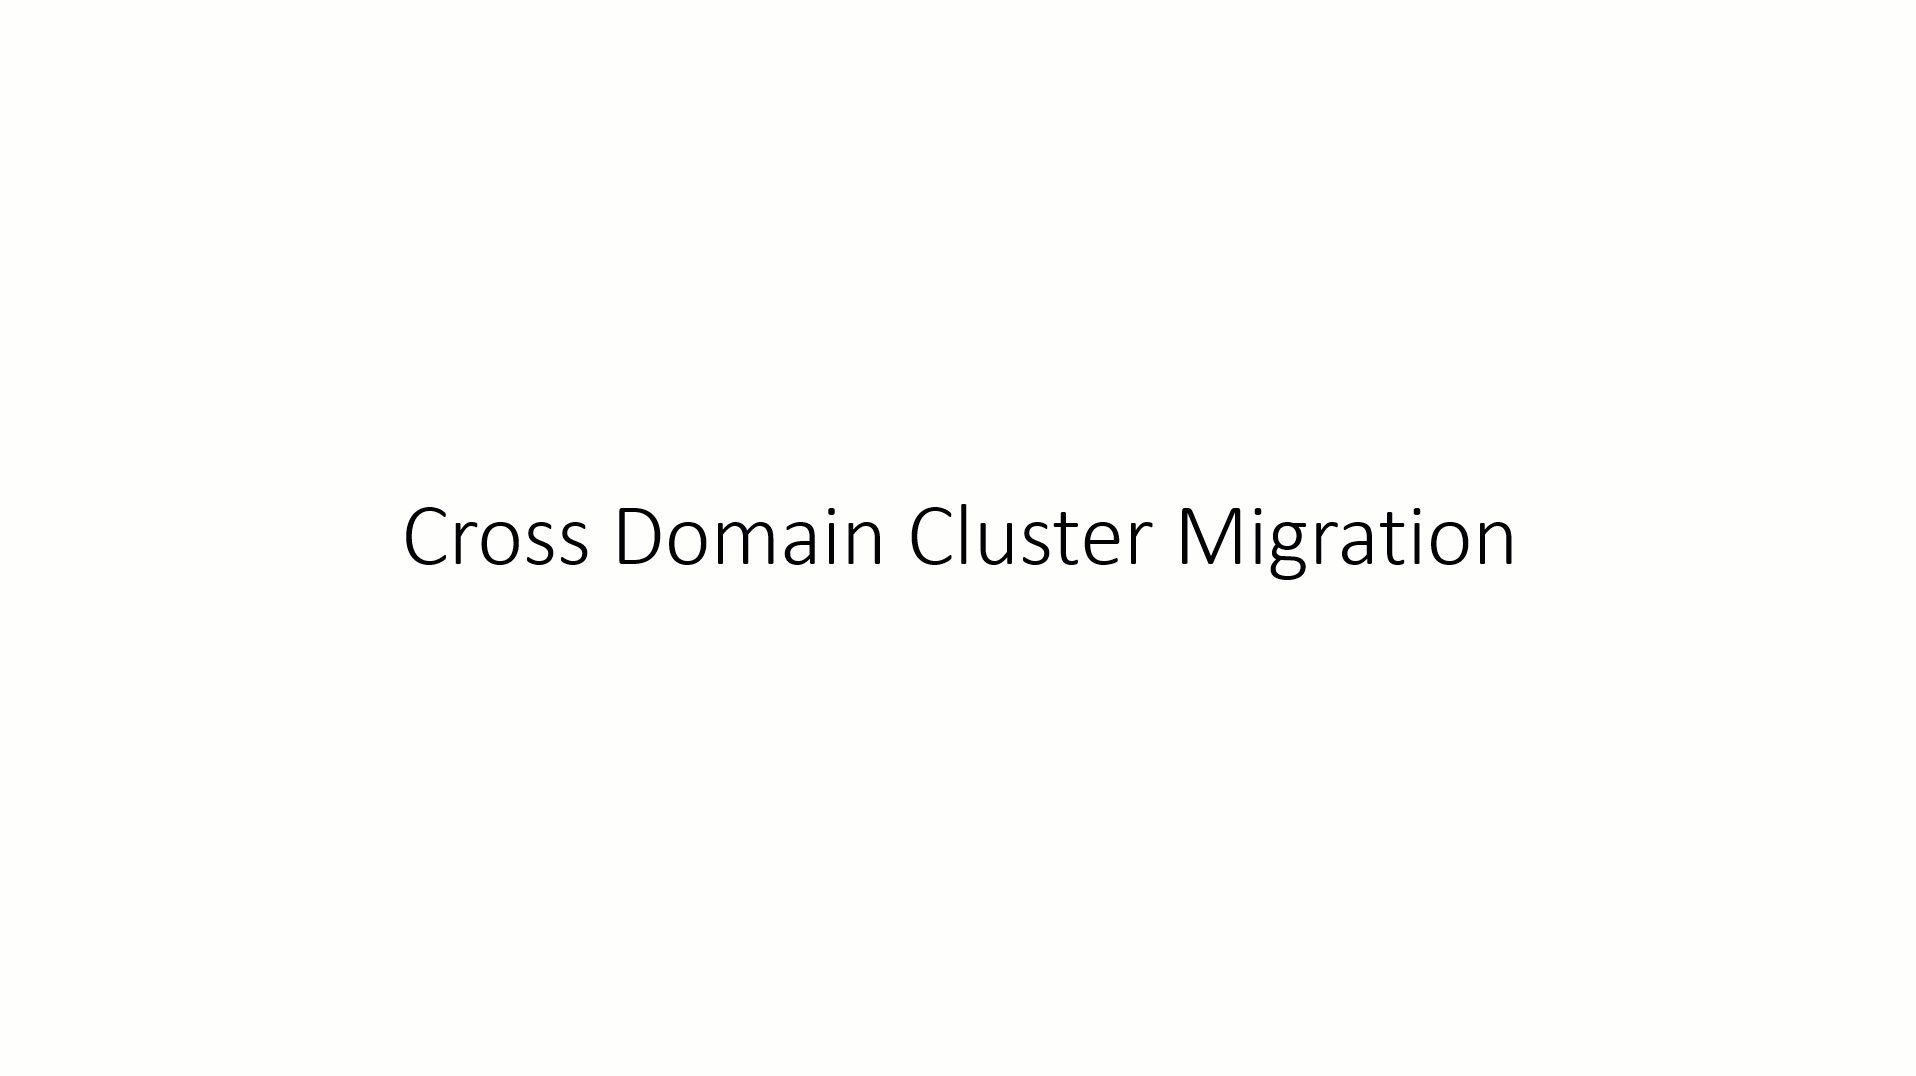 An animation demonstrating how a cluster is migrated from the previous domain to a new domain.